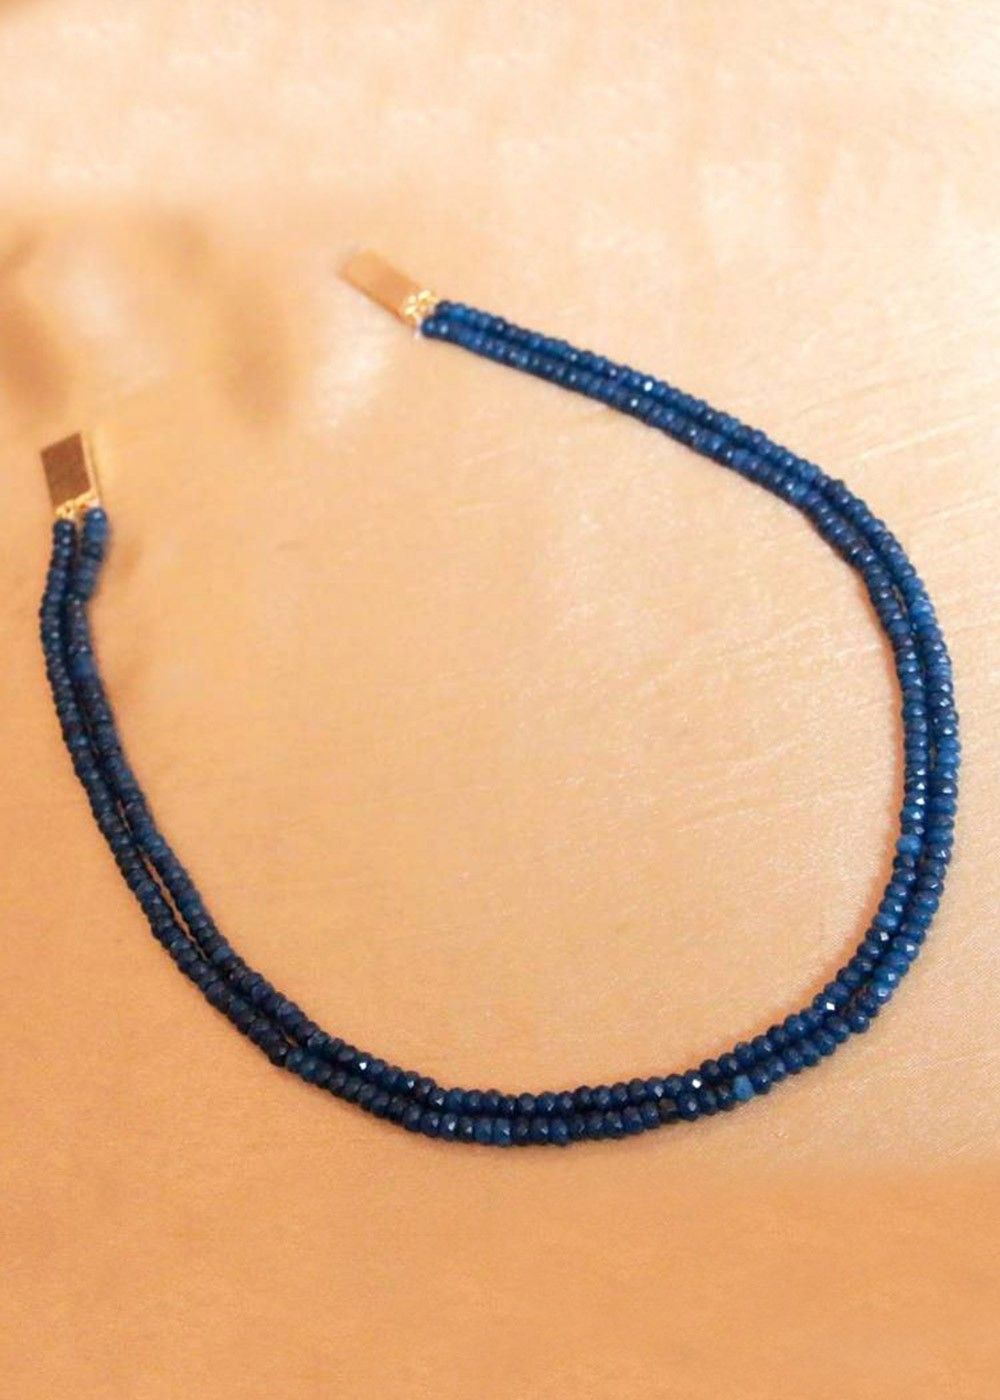 Buy Manbhar Gems Semi Precious Gemstone Royal Navy Blue Onyx Beads Necklace  Round Faceted 7 Layer for Girl and Women Men Blue Mala Fashion Jewellery  Earring 1 Pair at Amazon.in